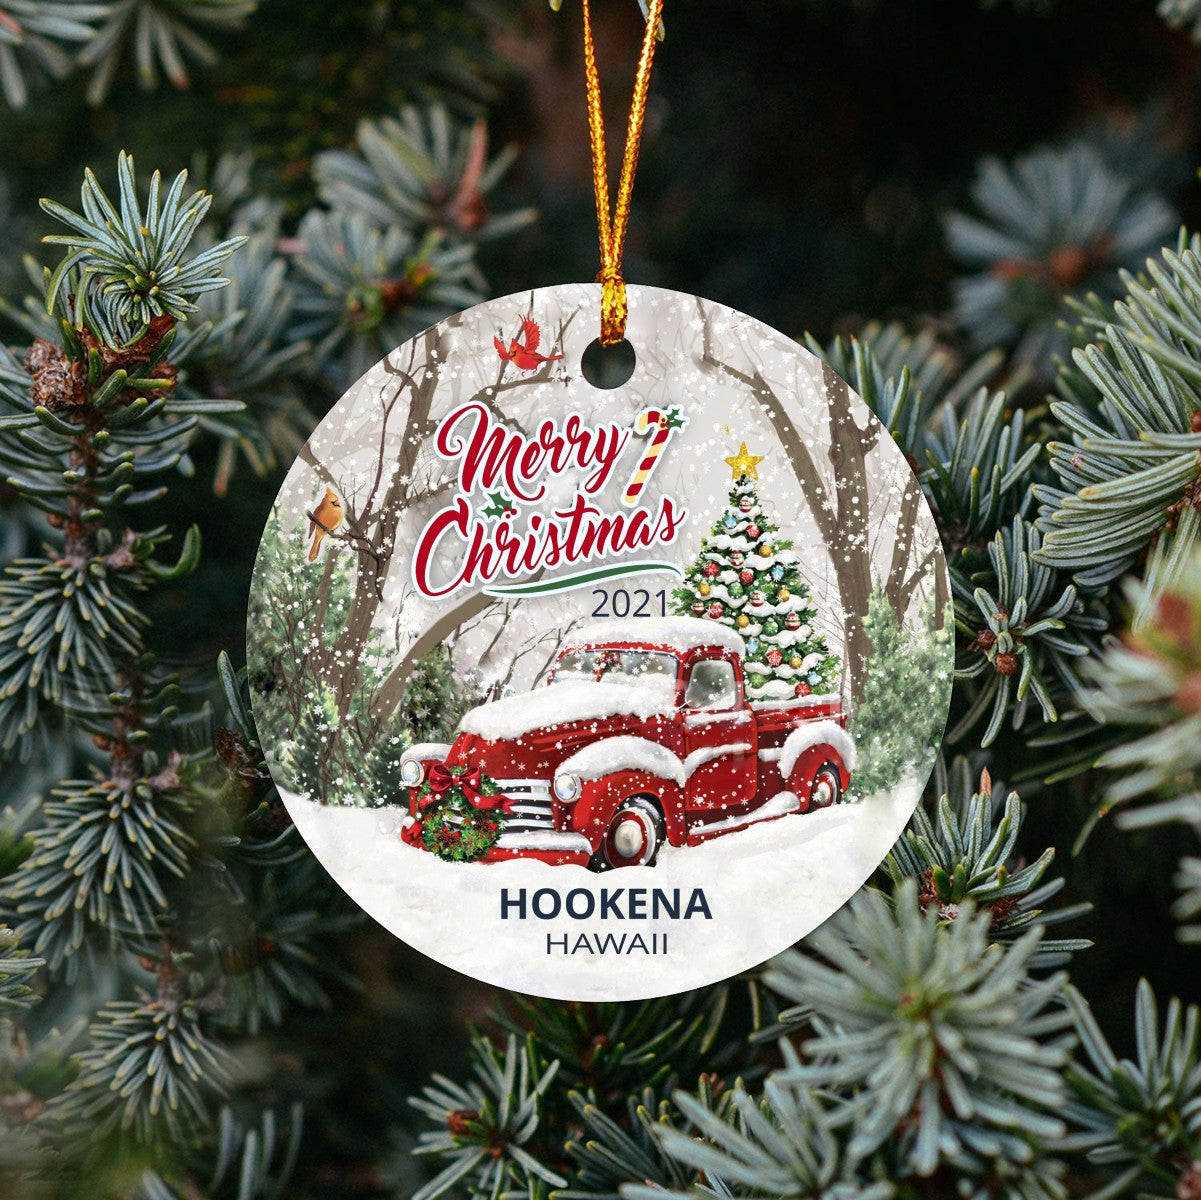 Christmas Tree Ornaments Hookena - Ornament With Name City, State Hookena Hawaii HI Ornament - Red Truck Xmas Ornaments 3'' Plastic Gift For Family, Friend And Housewarming